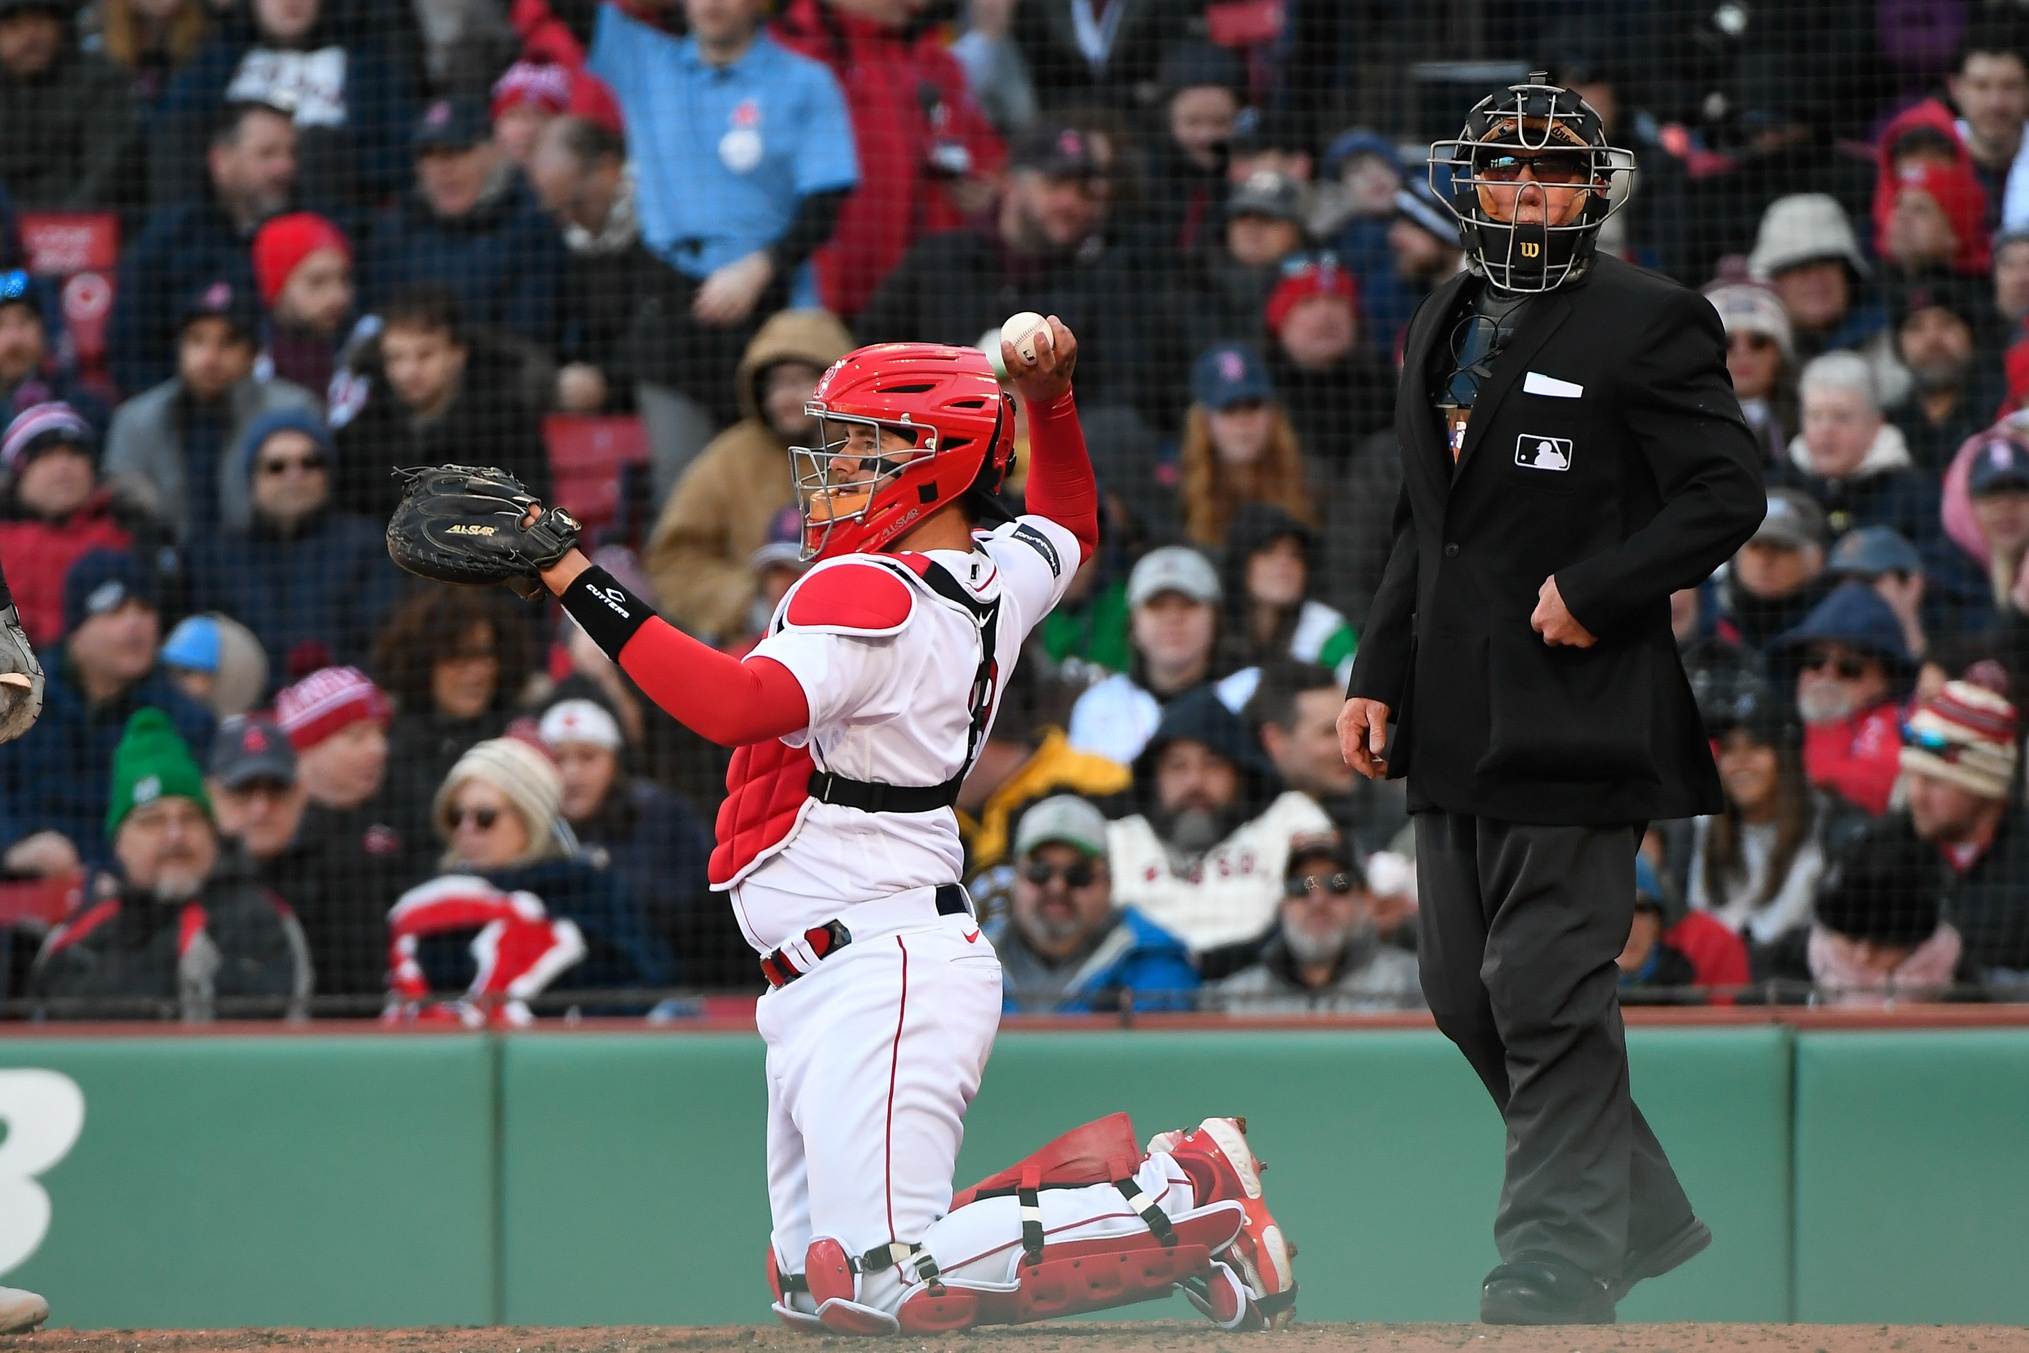 Red Sox storylines to watch down the stretch